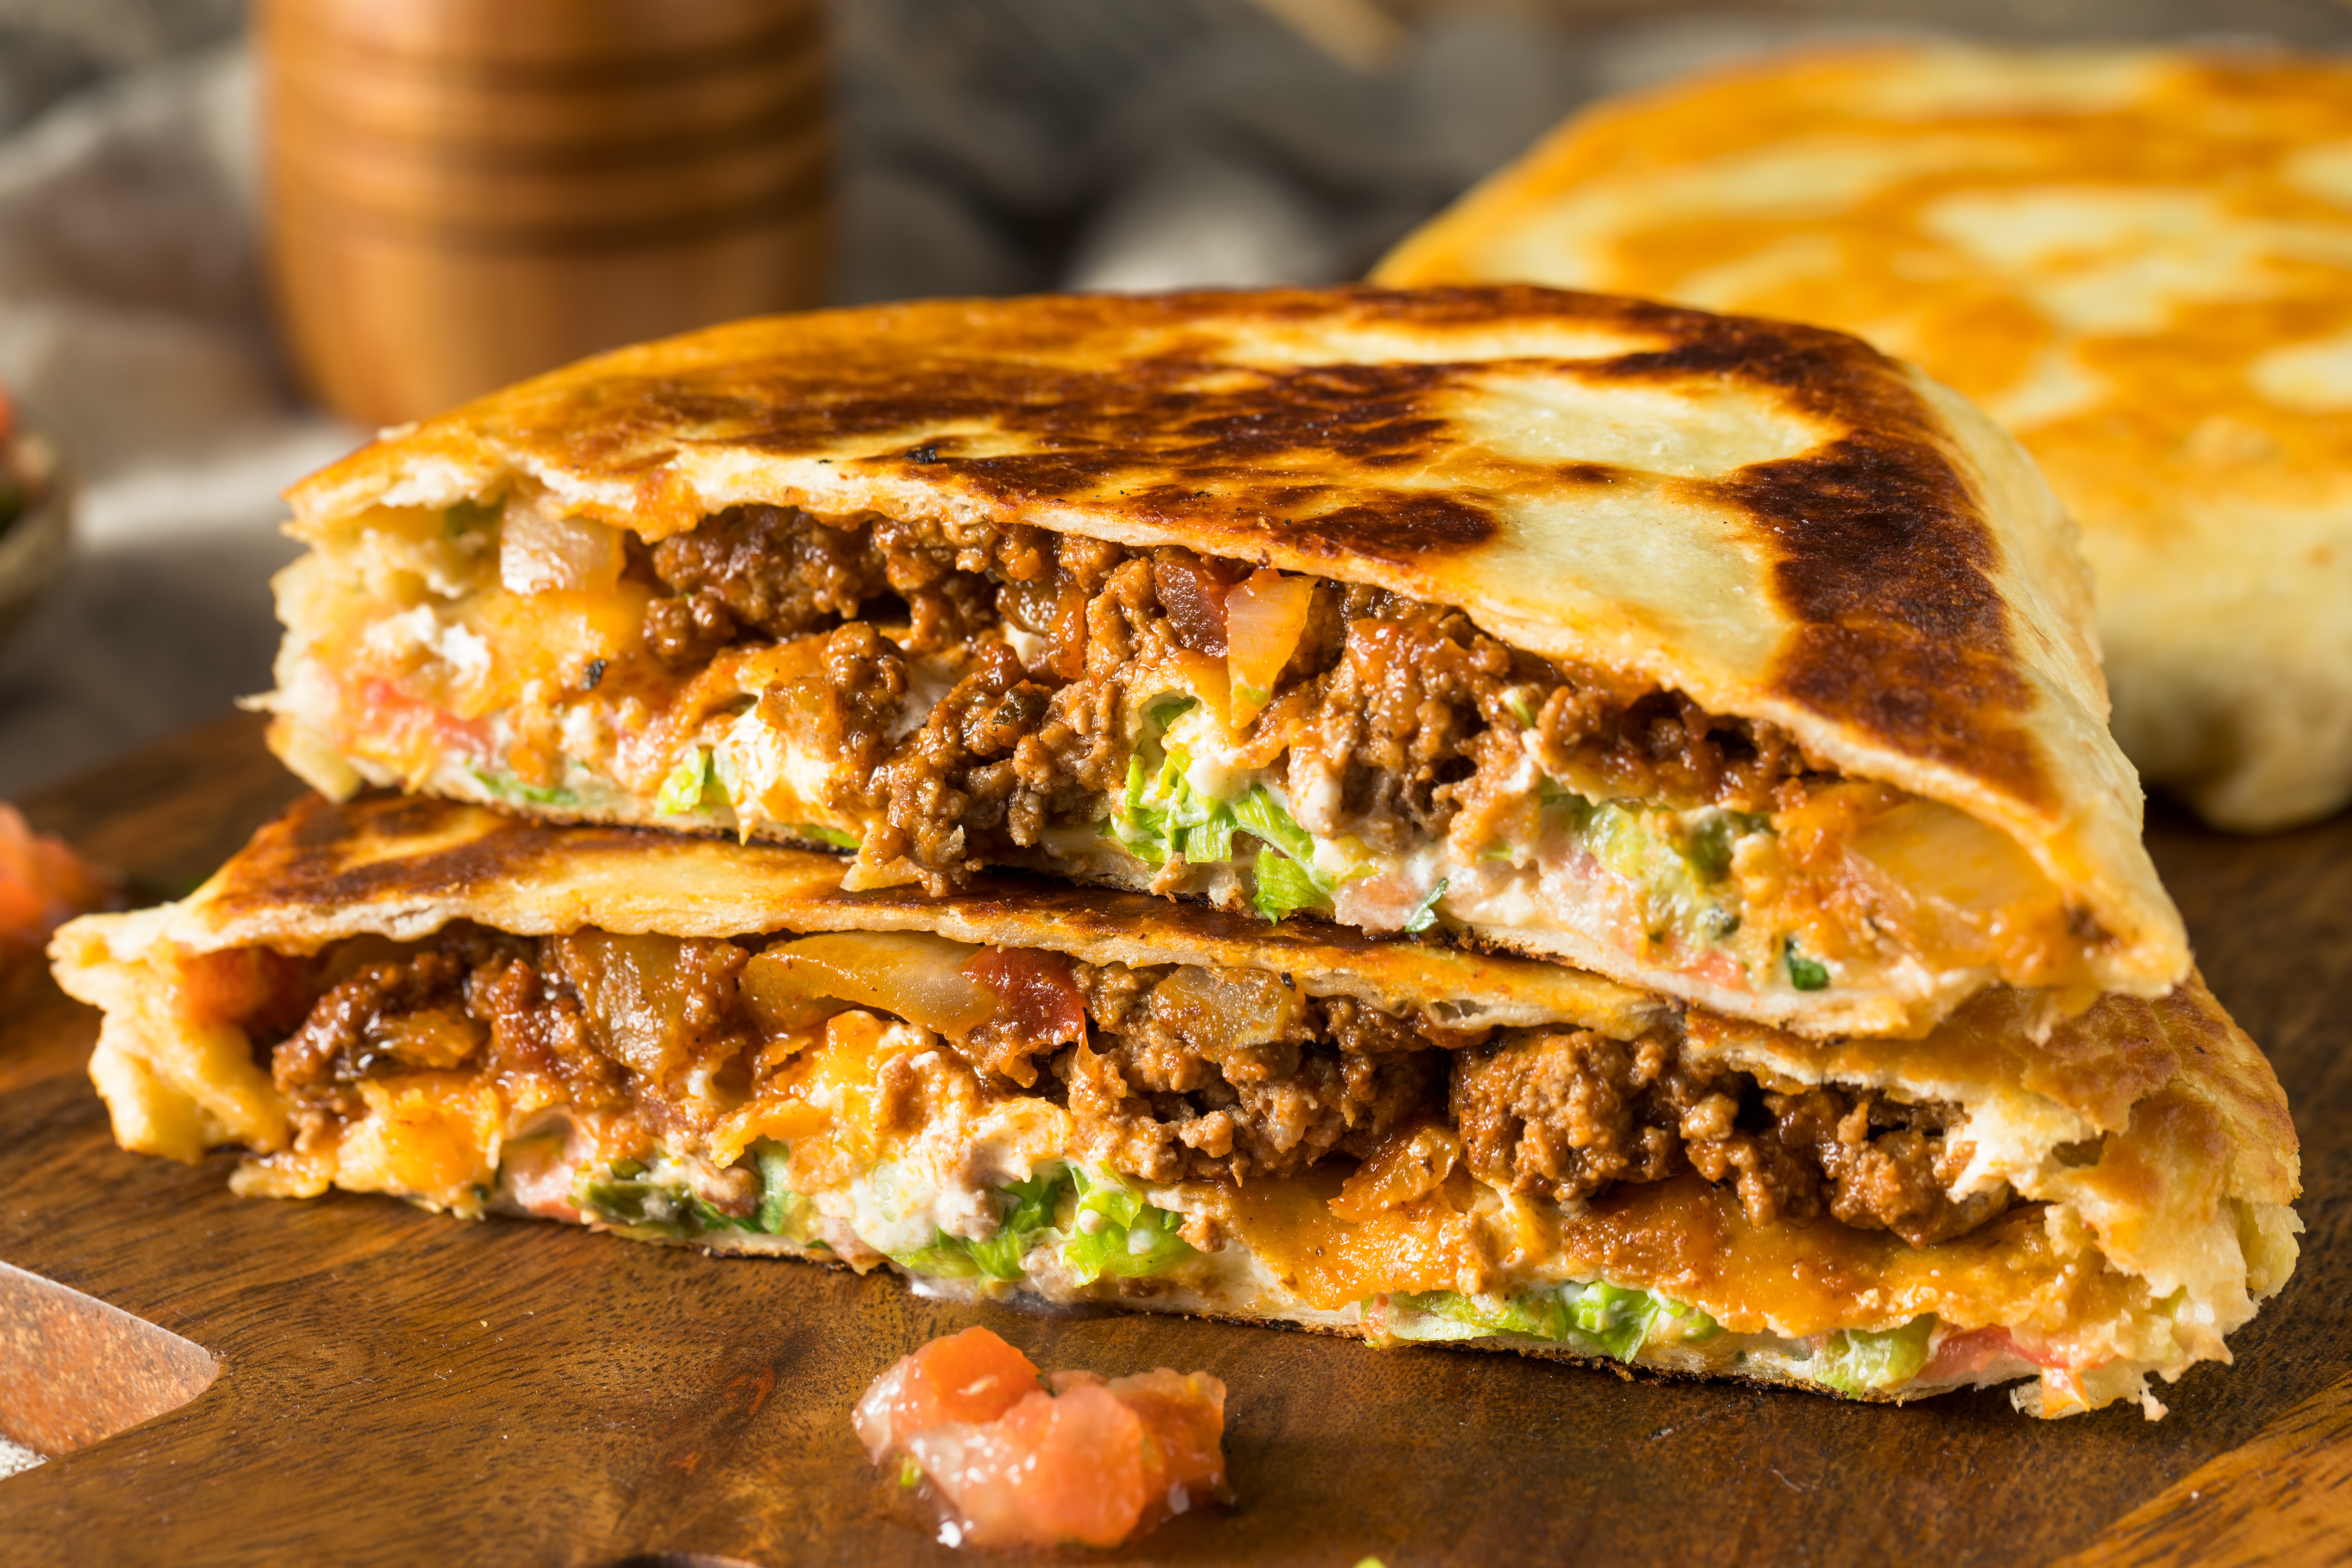 A Crunchwrap cut in half and stacked.